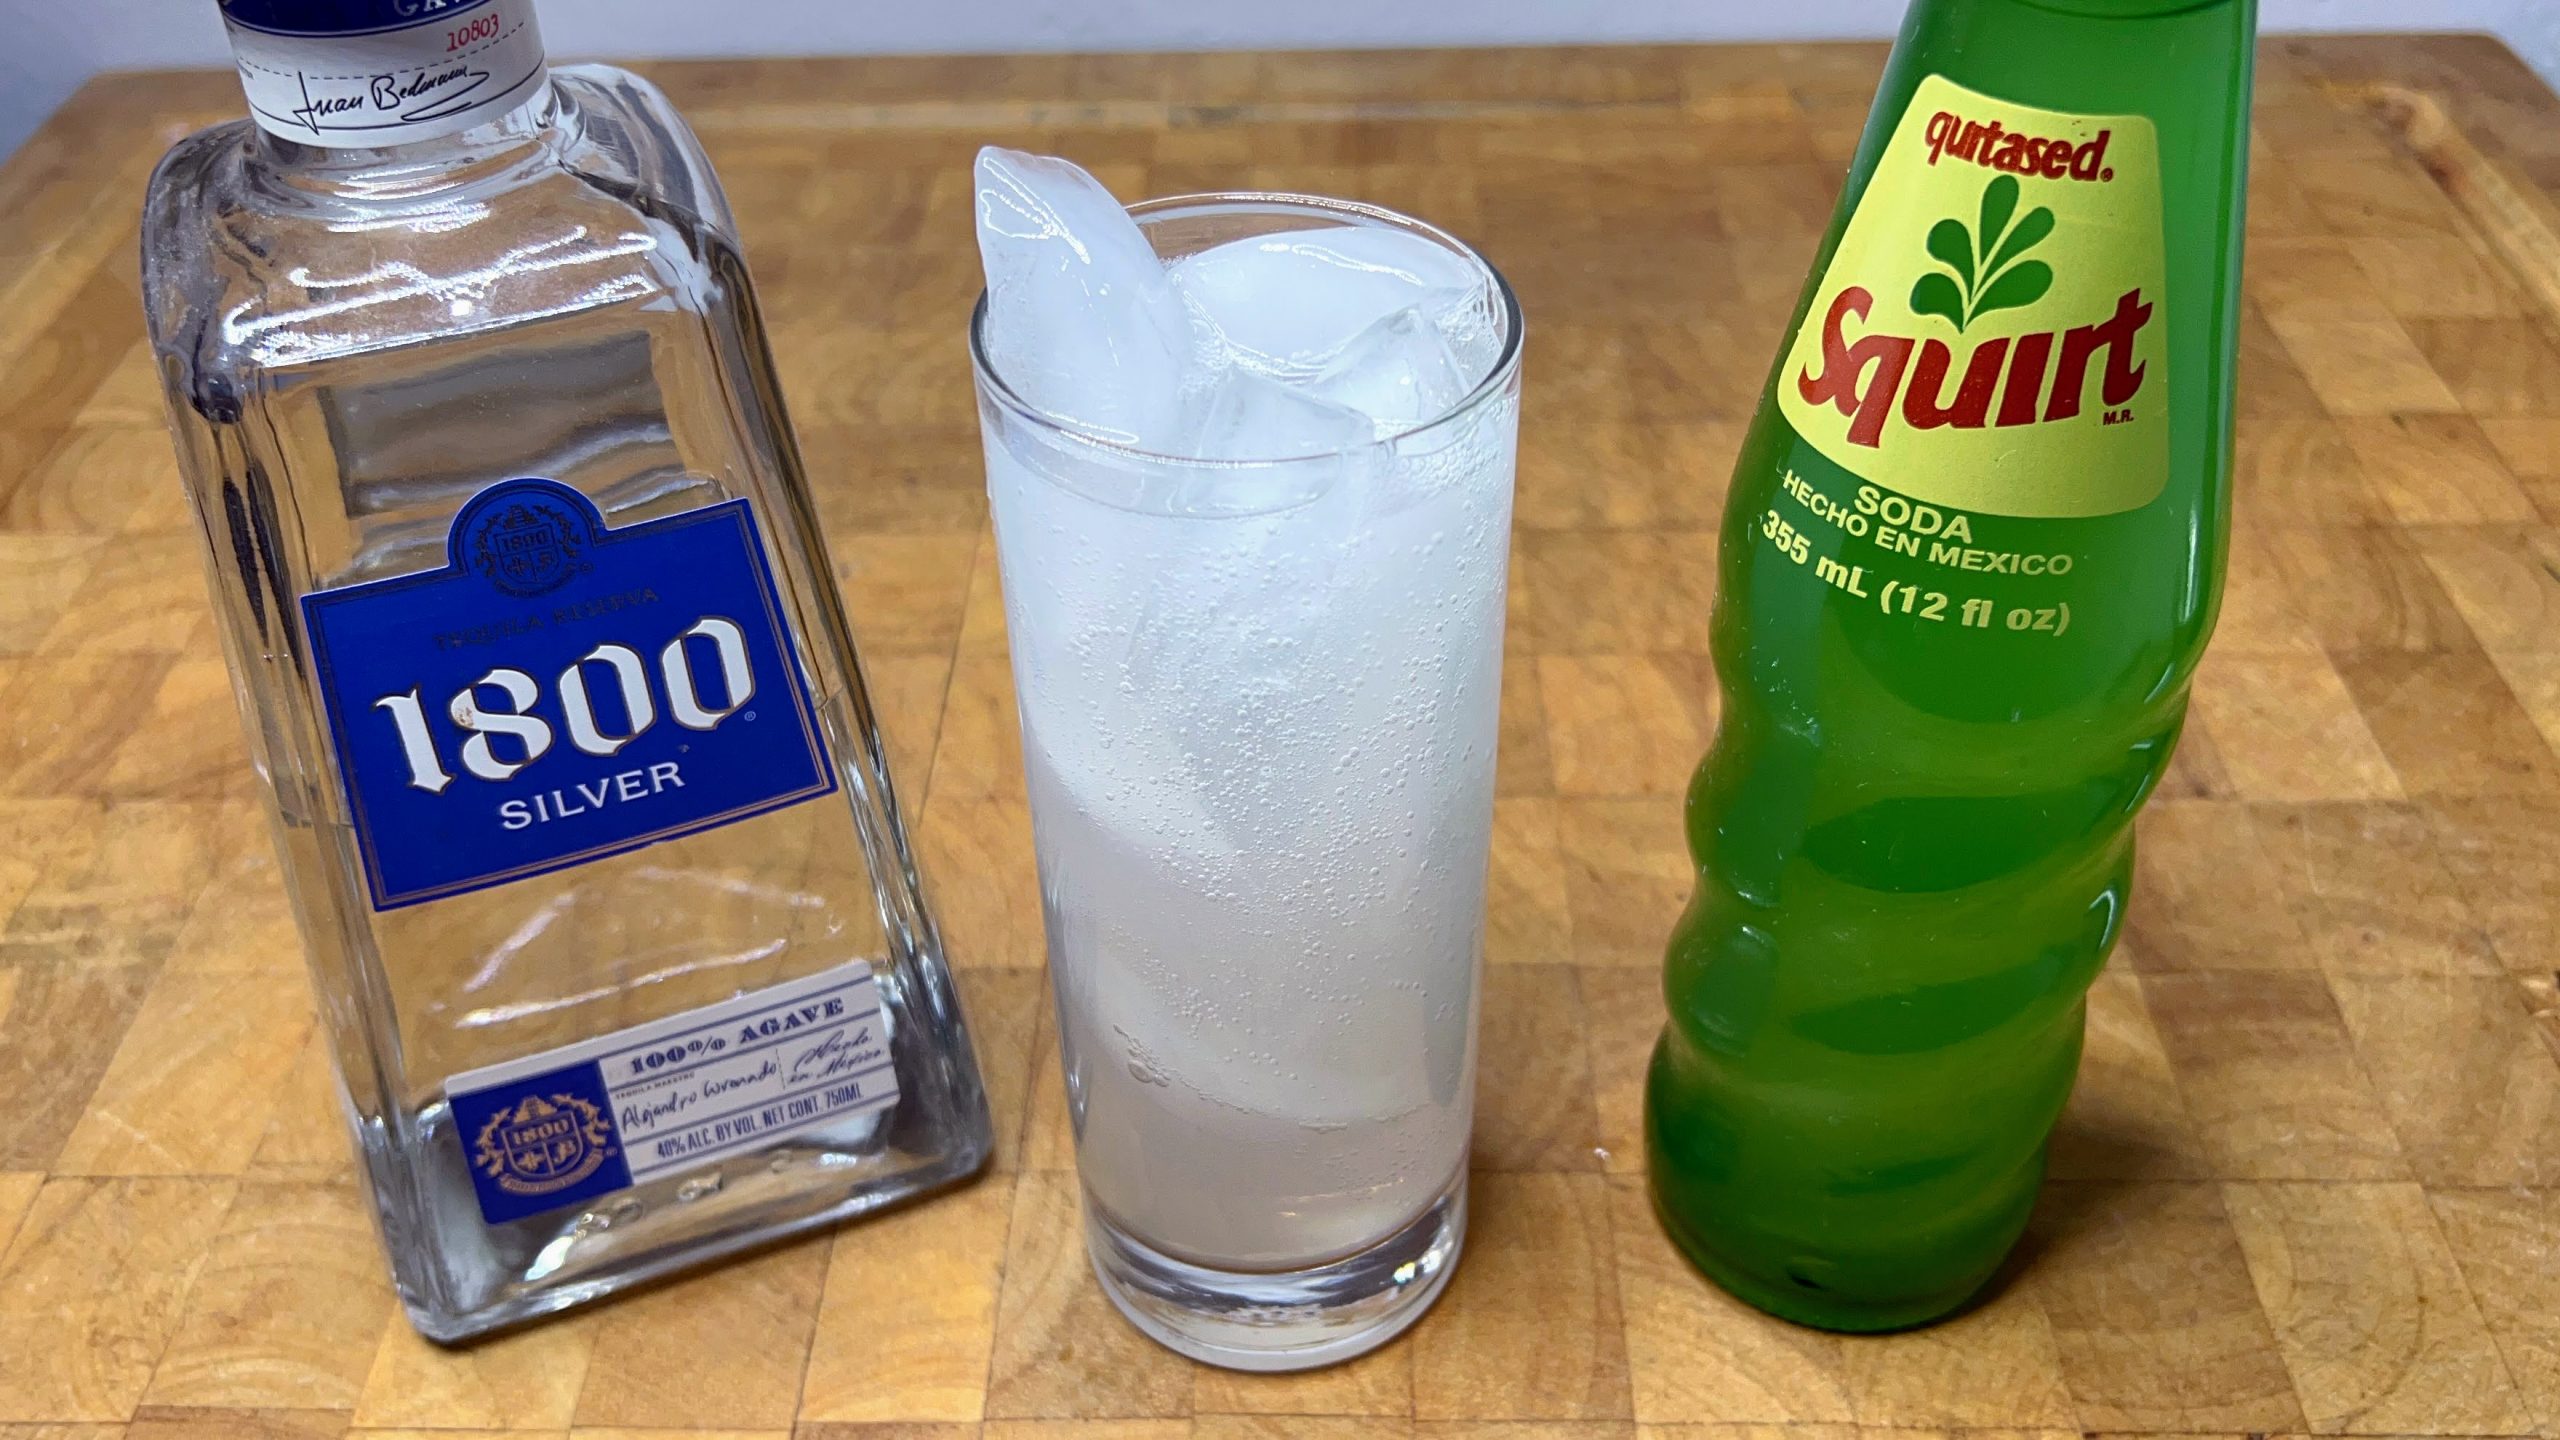 What Alcohol Goes with Squirt Soda